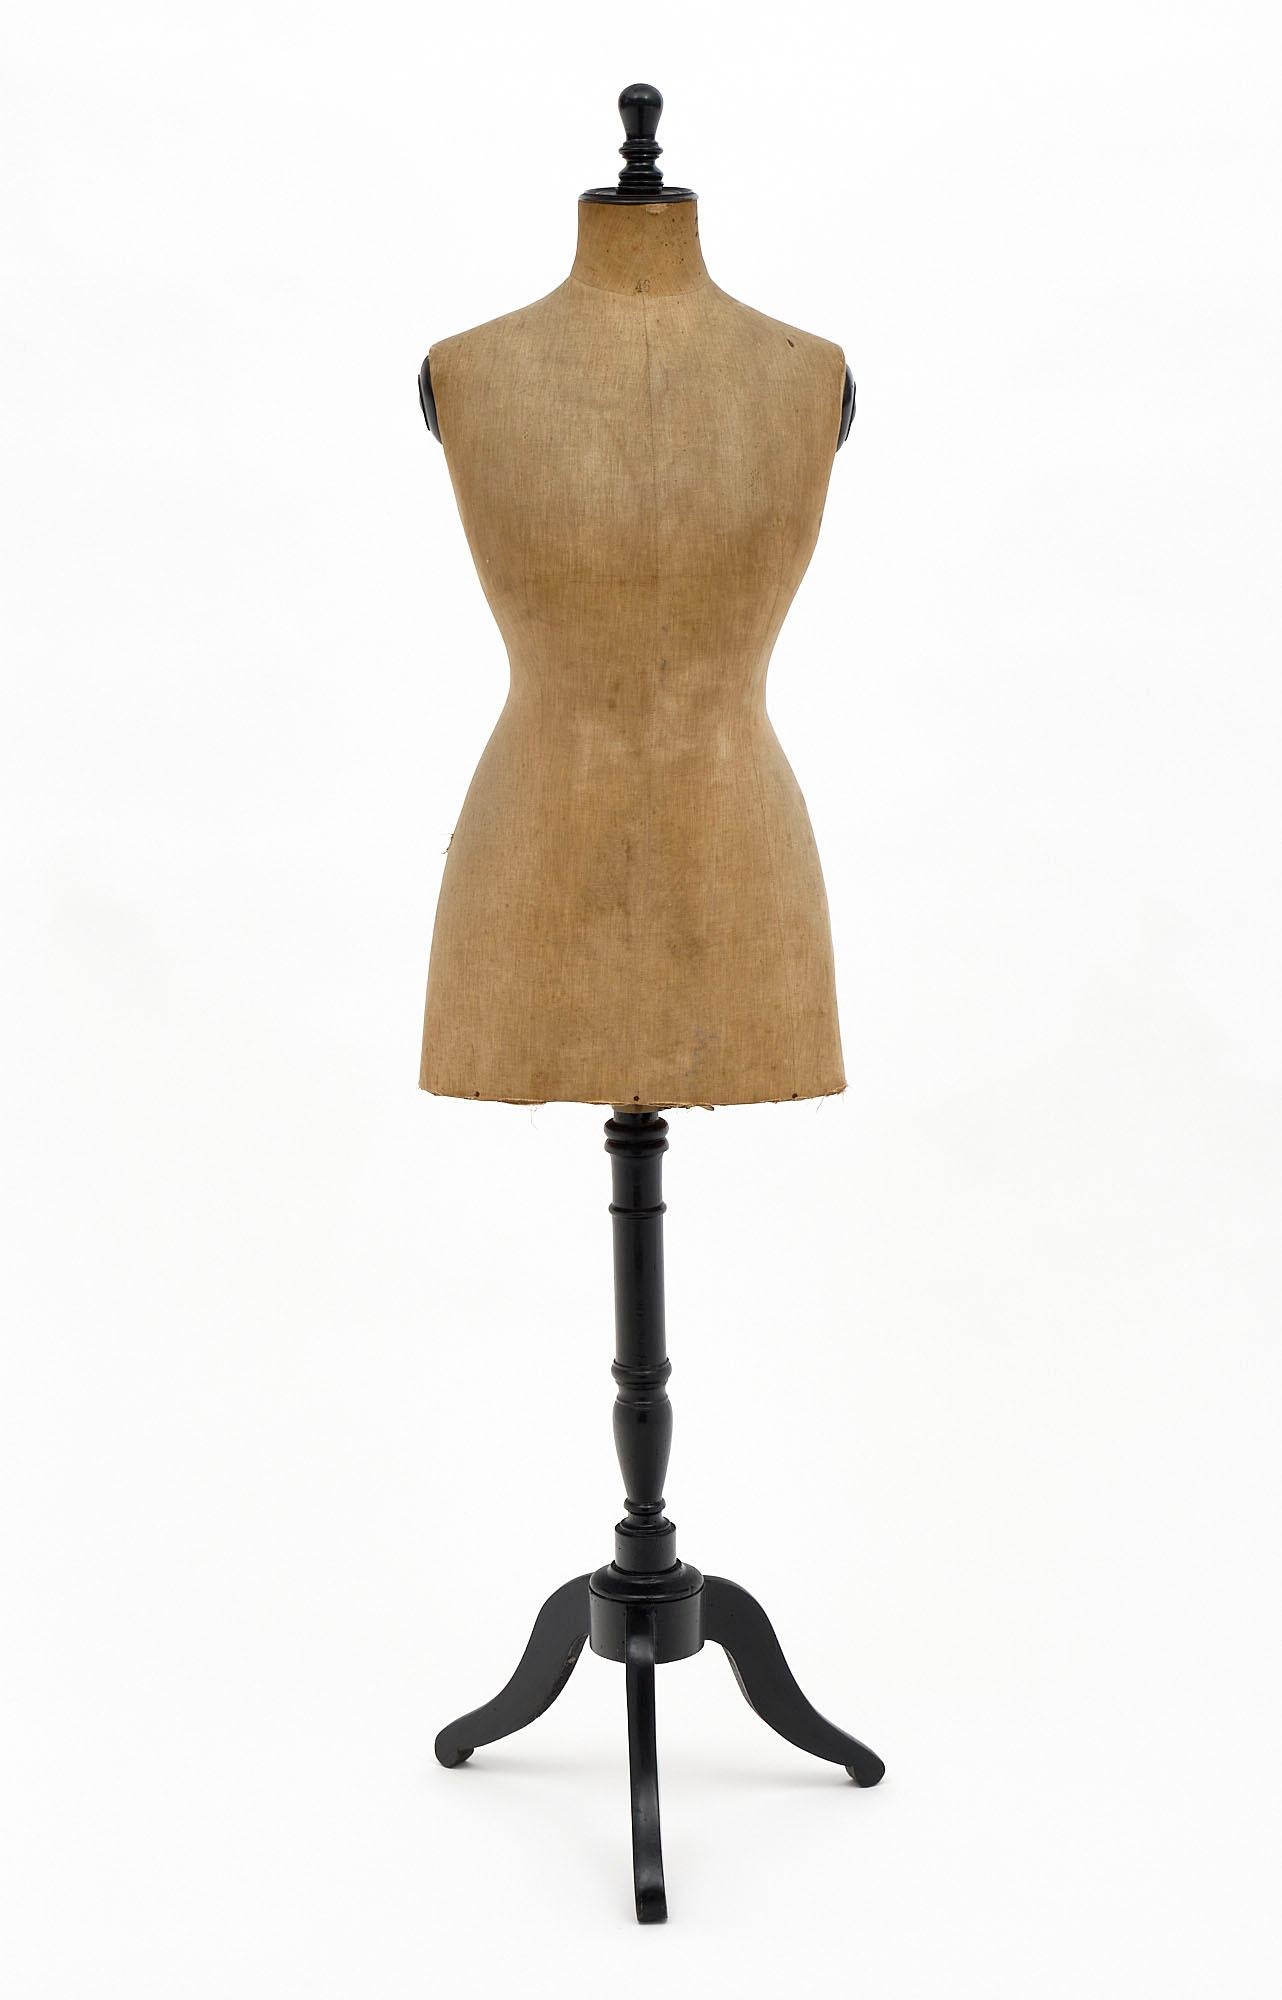 French antique mannequin with handcrafted ebonized pear wood structure and turned stem with a tripod base. It still boasts the original linen body cover.